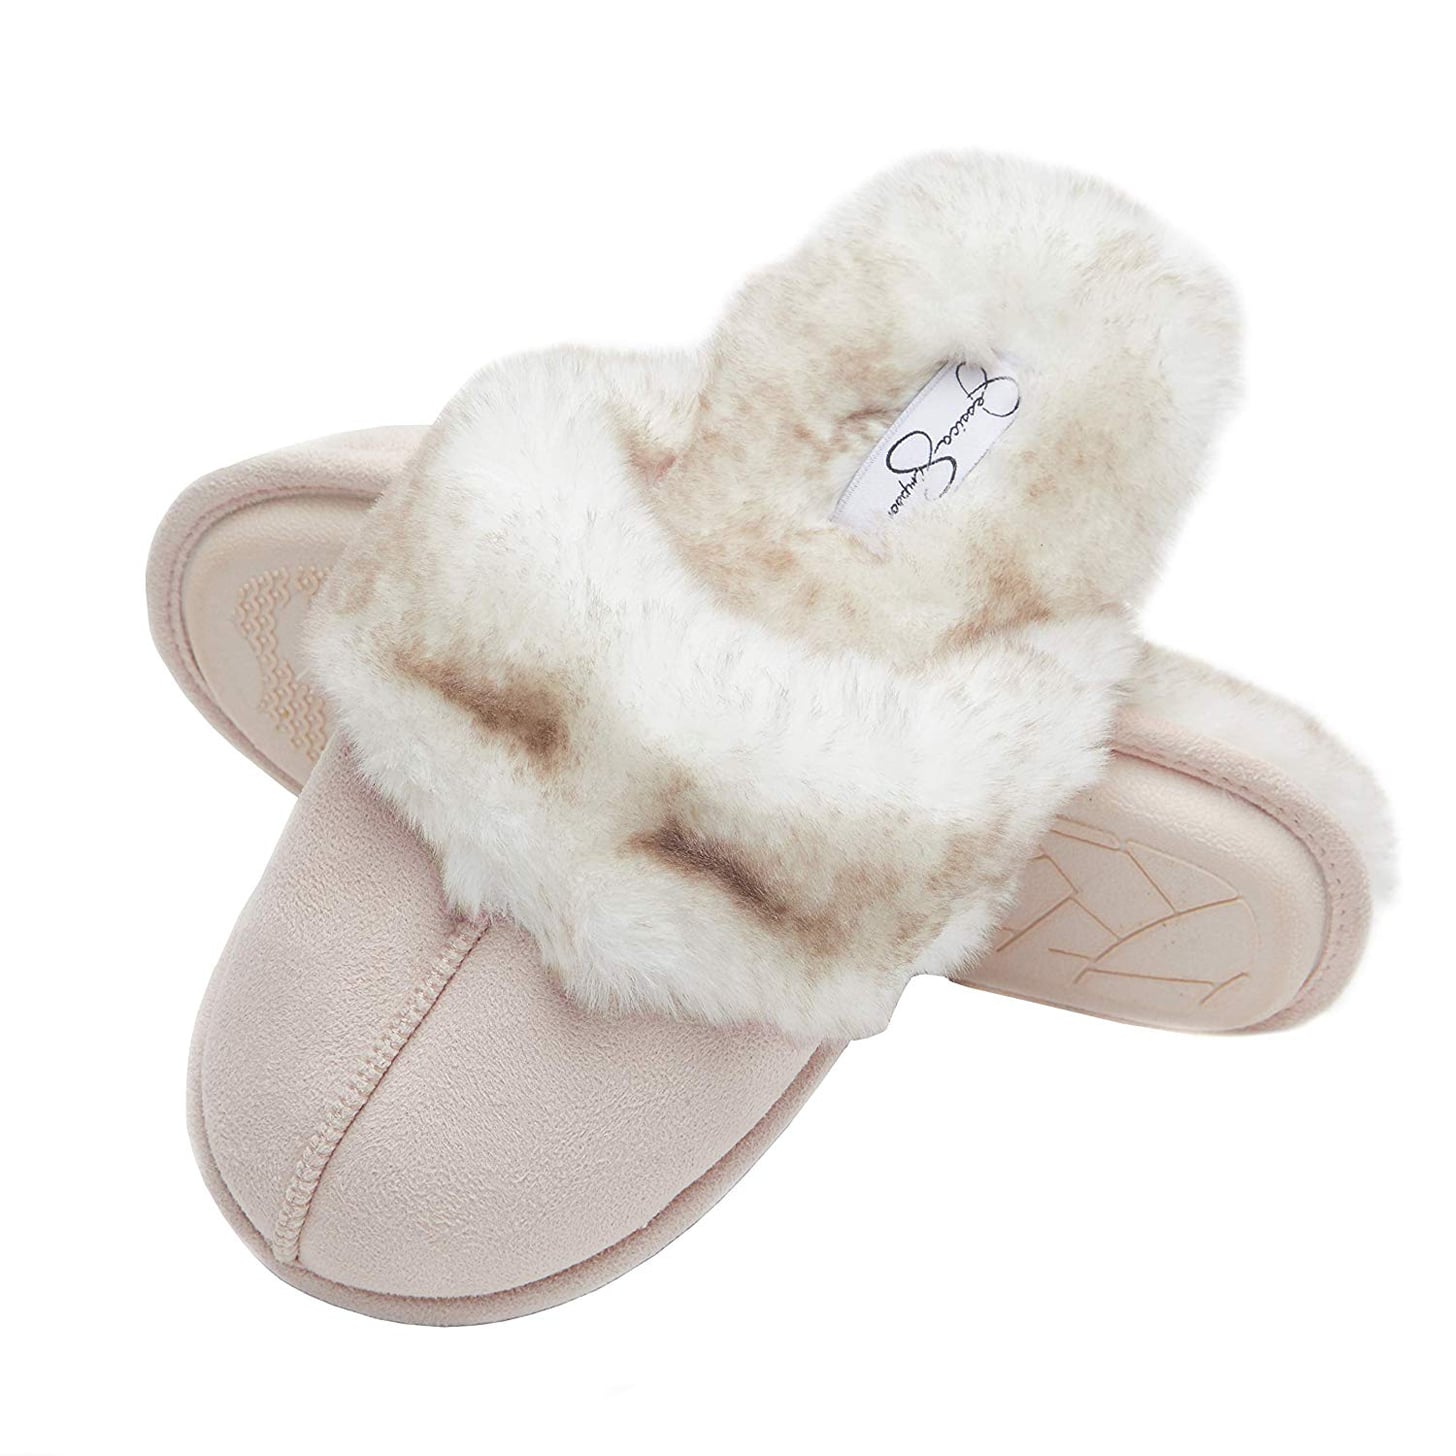 bed bath beyond slippers shopping 33c4d 